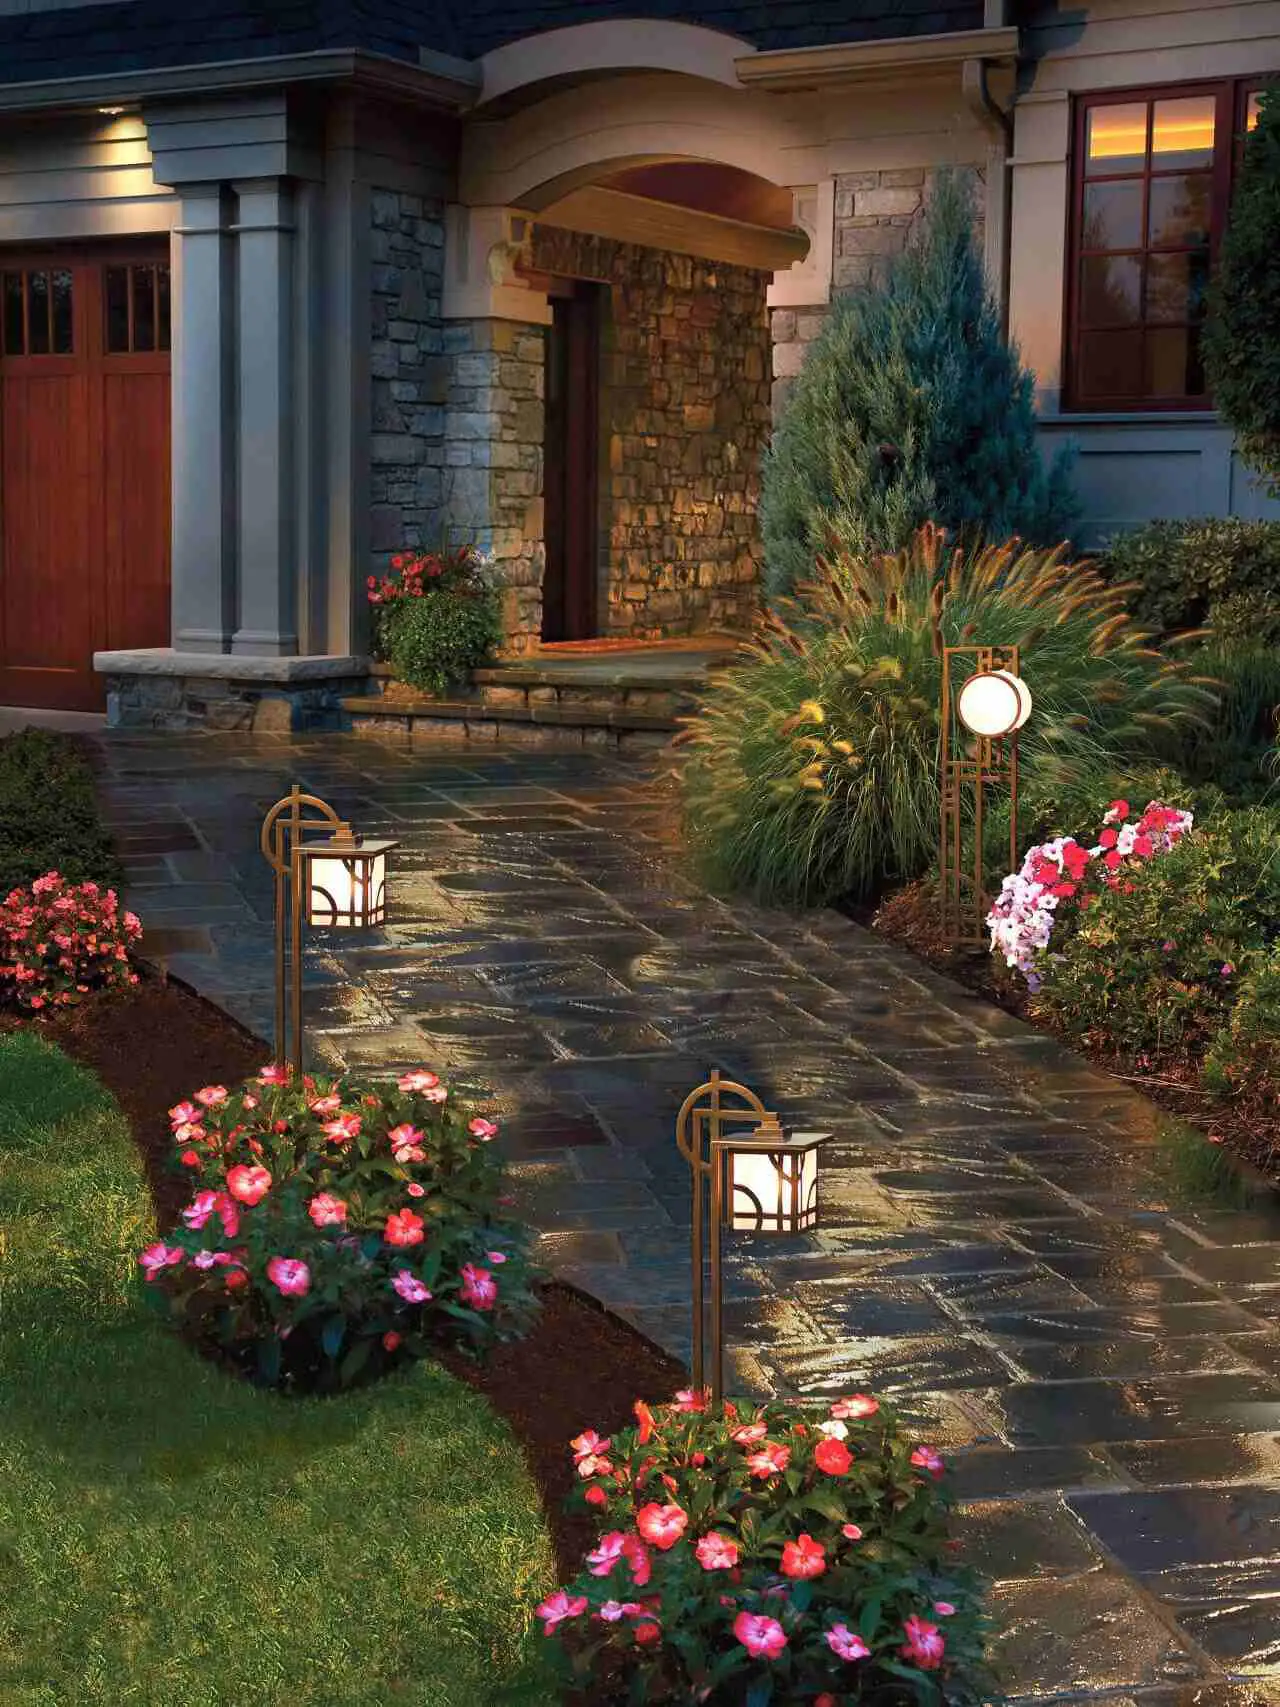 30+ Amazing DIY Front Yard Landscaping Ideas and Designs for 2019